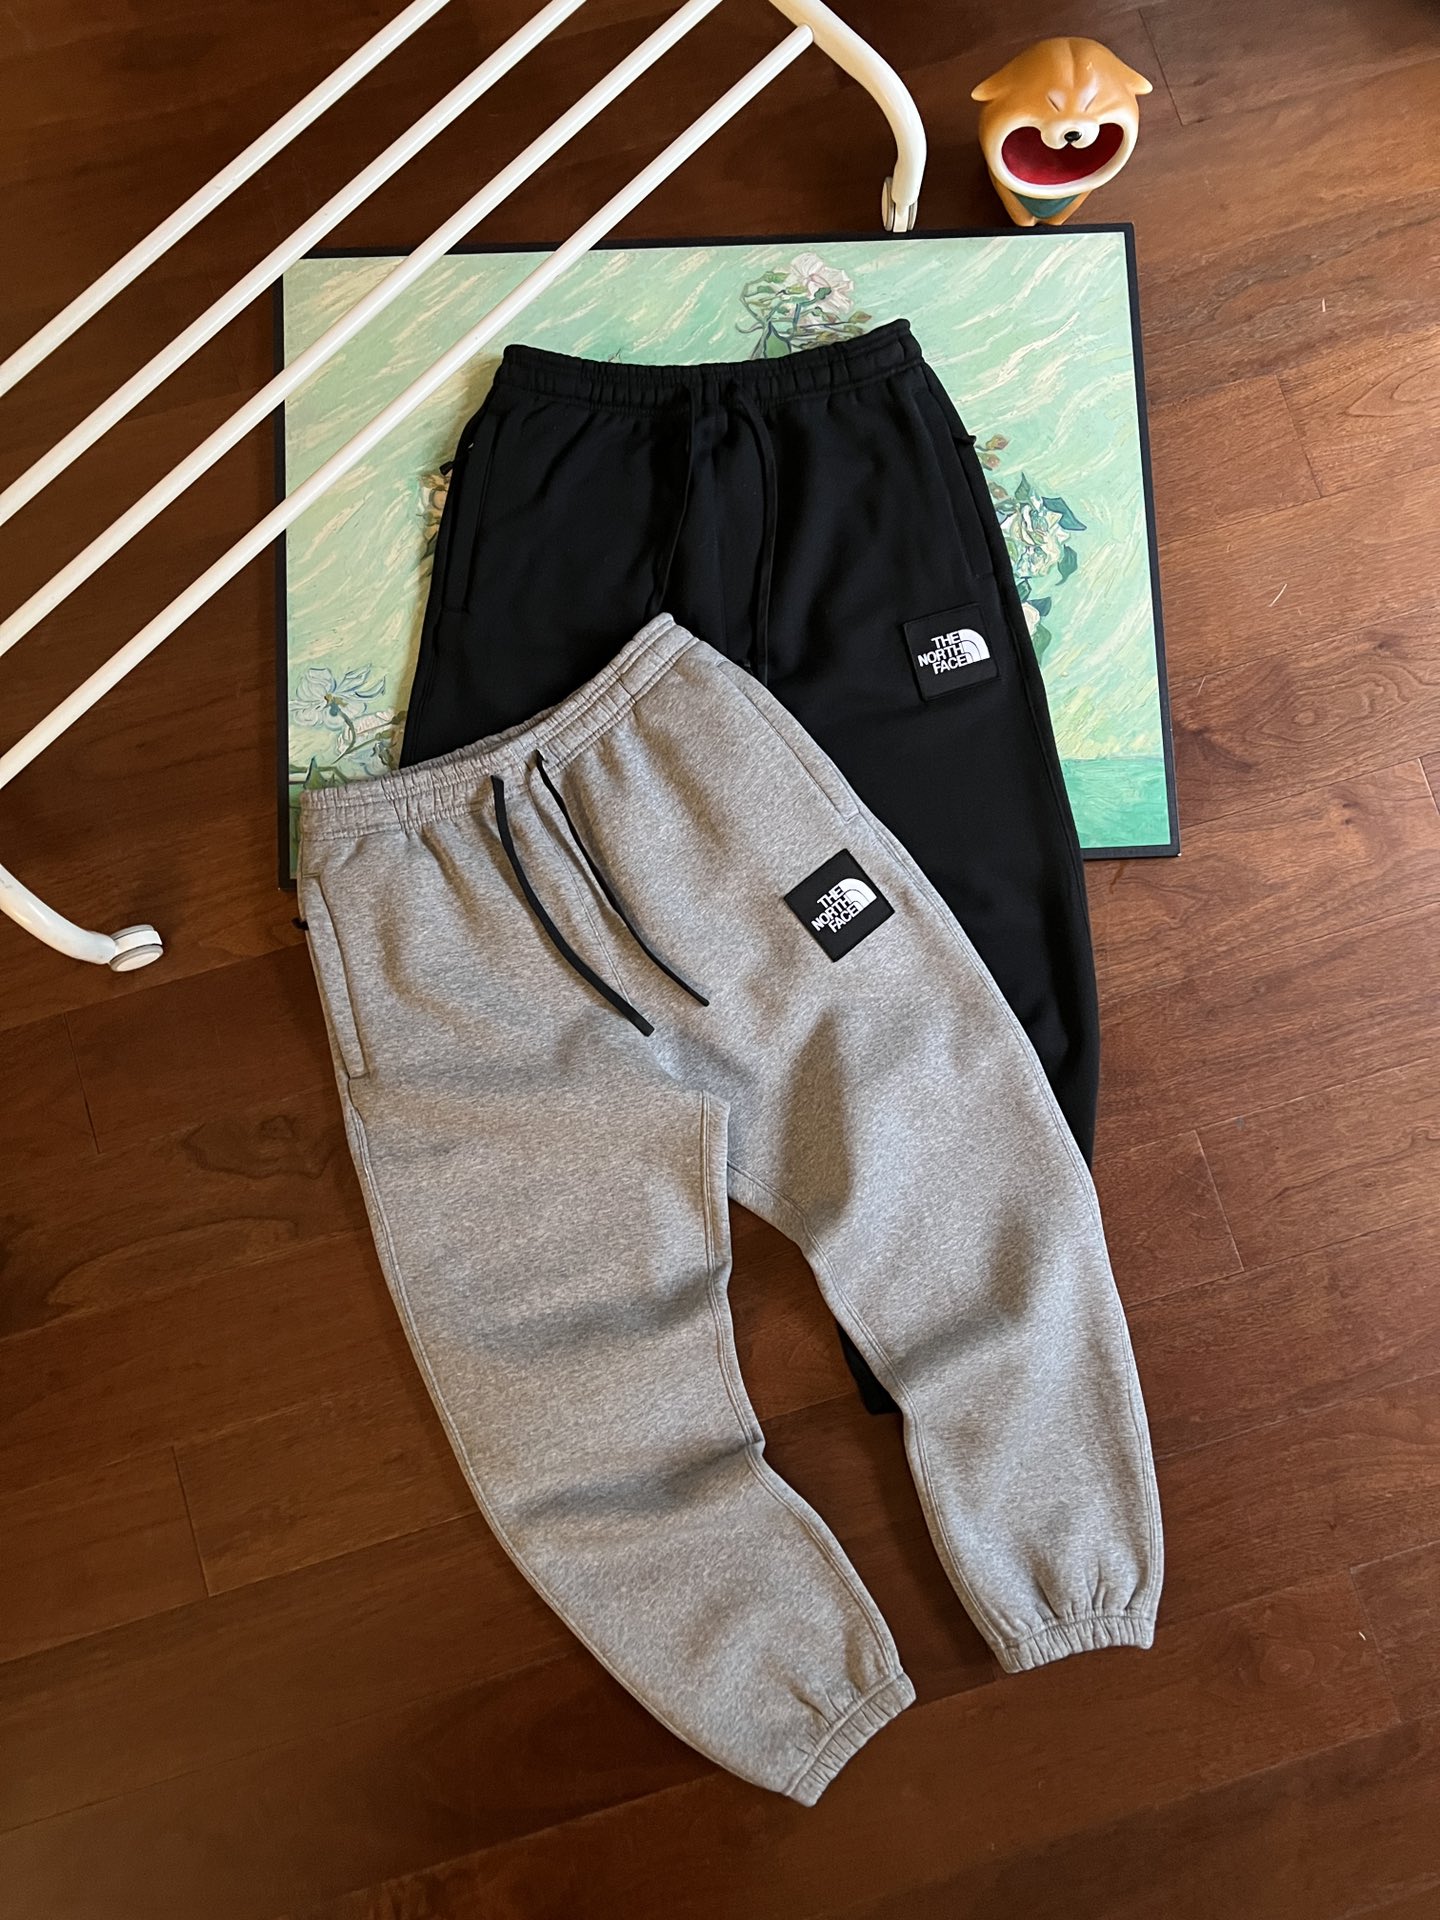 Shop Now
 The North Face Clothing Pants & Trousers Black Grey Embroidery Unisex Knitting Spring/Fall Collection Leggings